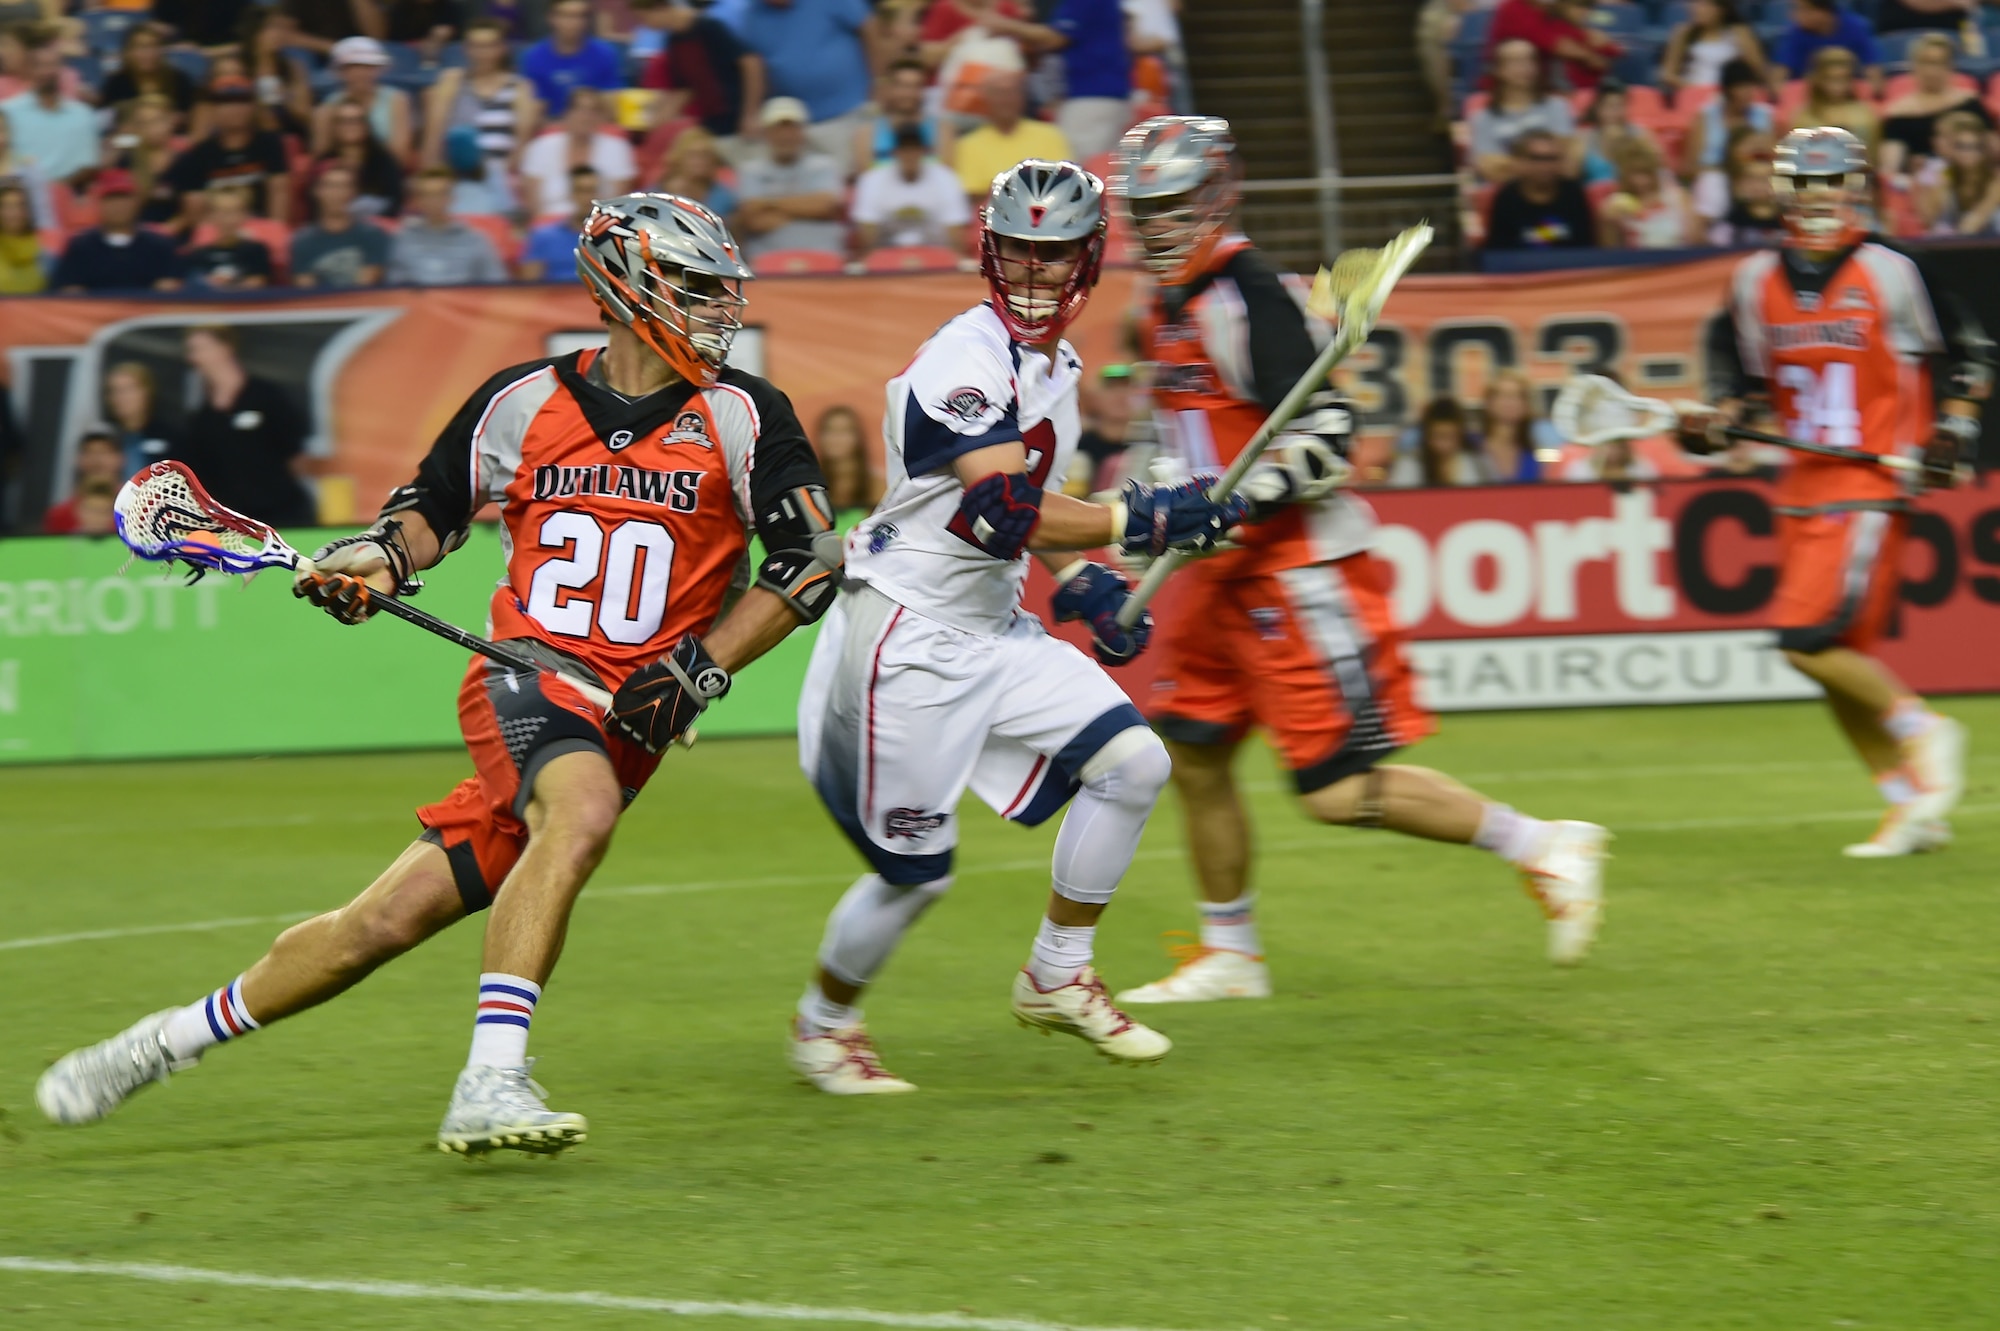 Jeremy Sieverts, midfielder for the Denver Outlaws, dodges a defender from the Boston Cannons July 4, 2015, at Sports Authority Field at Mile High Stadium in Denver. The Outlaws hosted the Cannons in a Major League Lacrosse game which honored military members on Independence Day. (U.S. Air Force photo by Airman 1st Class Luke W. Nowakowski/Released)